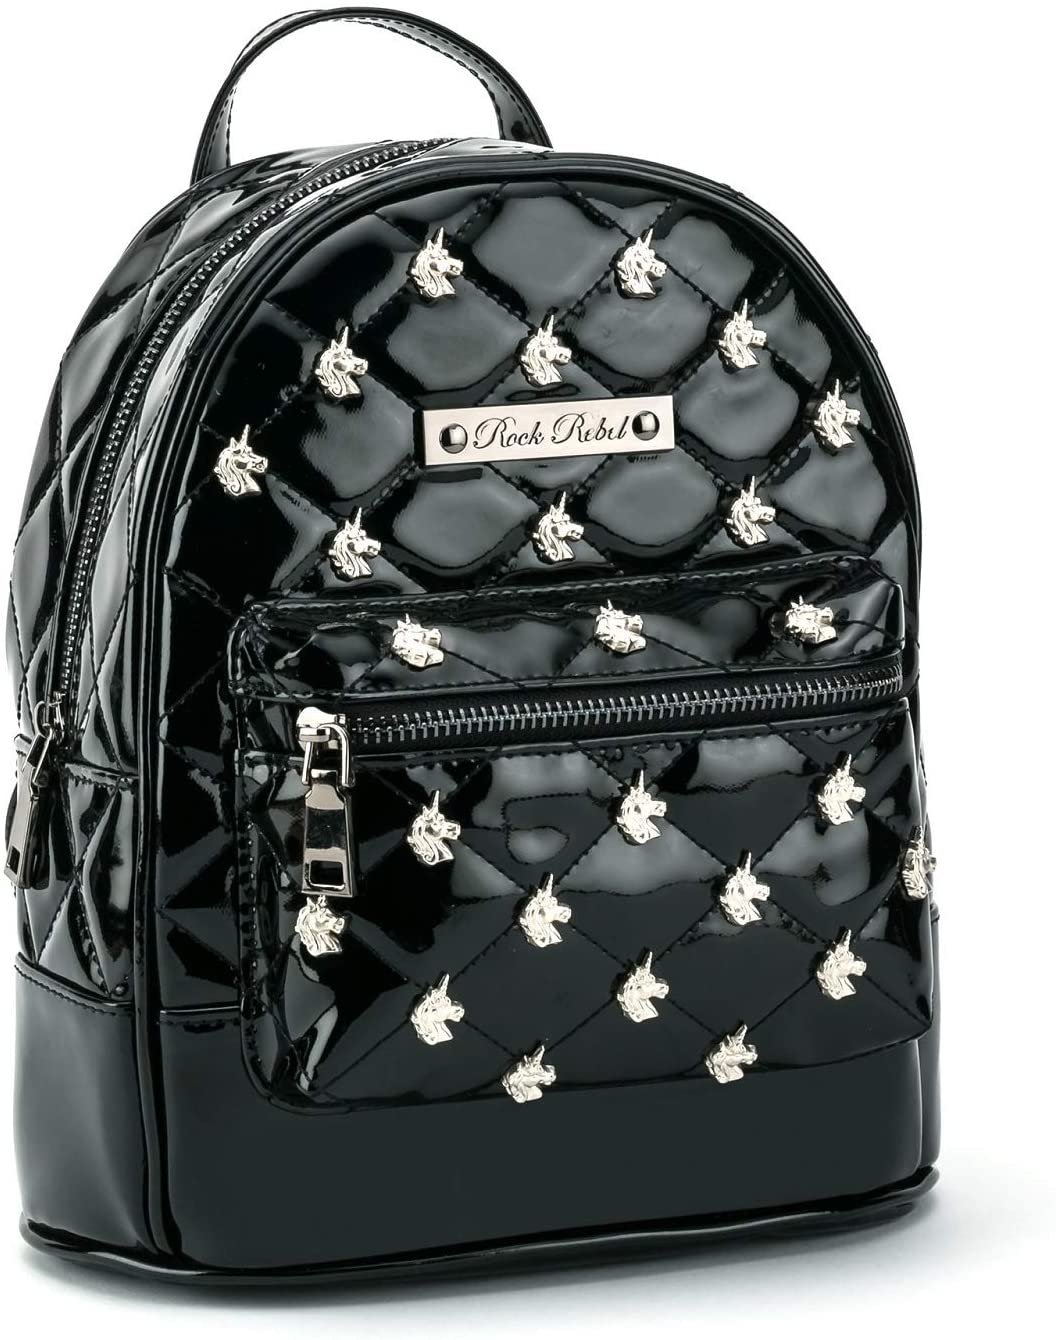 Rock Rebel Unicorn Studded Quilted Mini Backpack Black